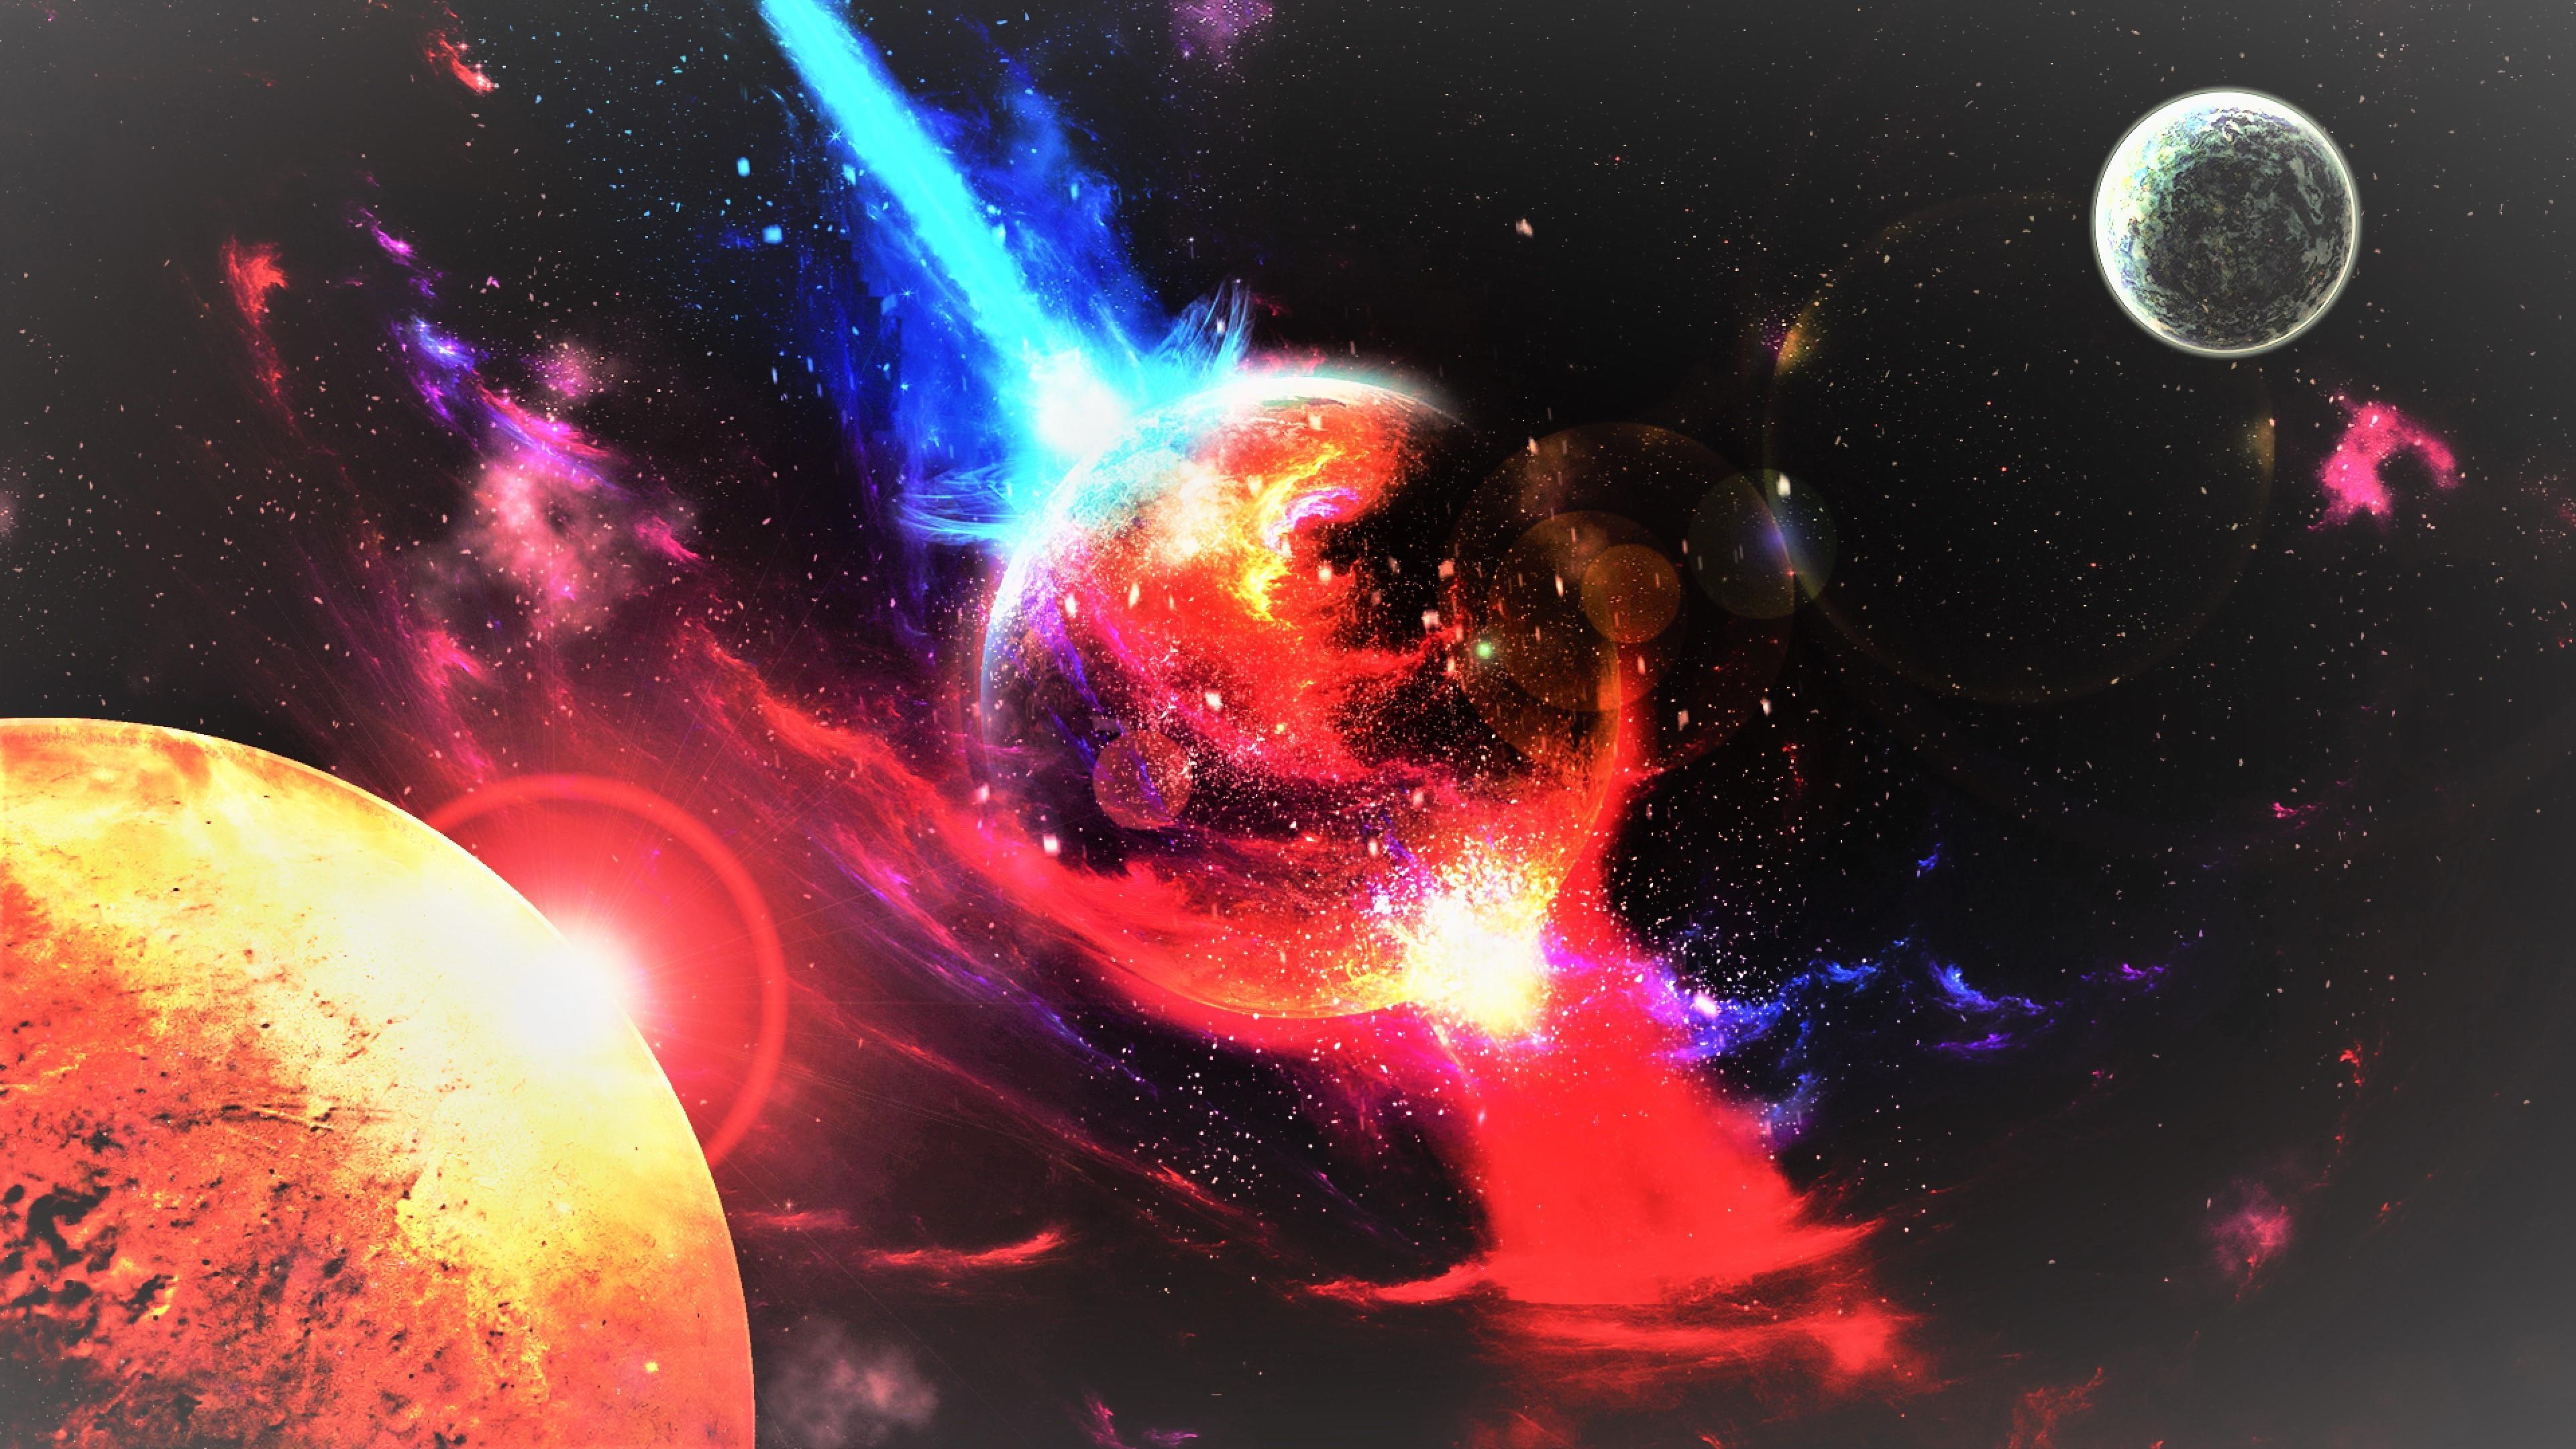 Space Planet Explosion Wallpaper Hd Space 4k Wallpapers Images Images